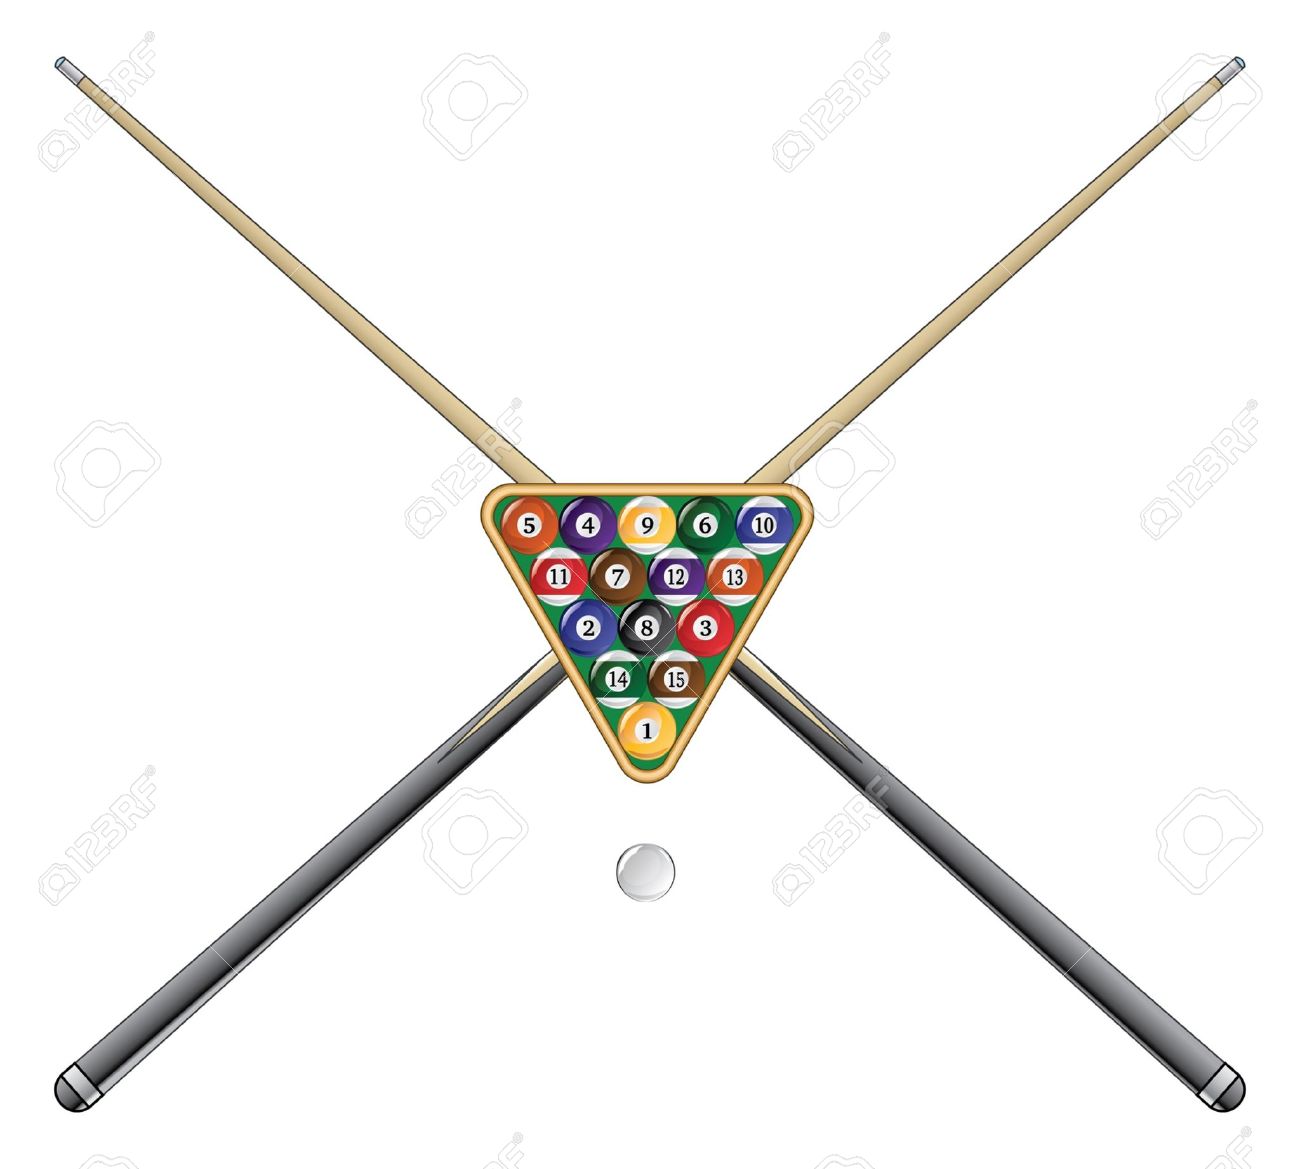 Px Pool Cue Render Free Images At Clker Com Vector Cl - vrogue.co